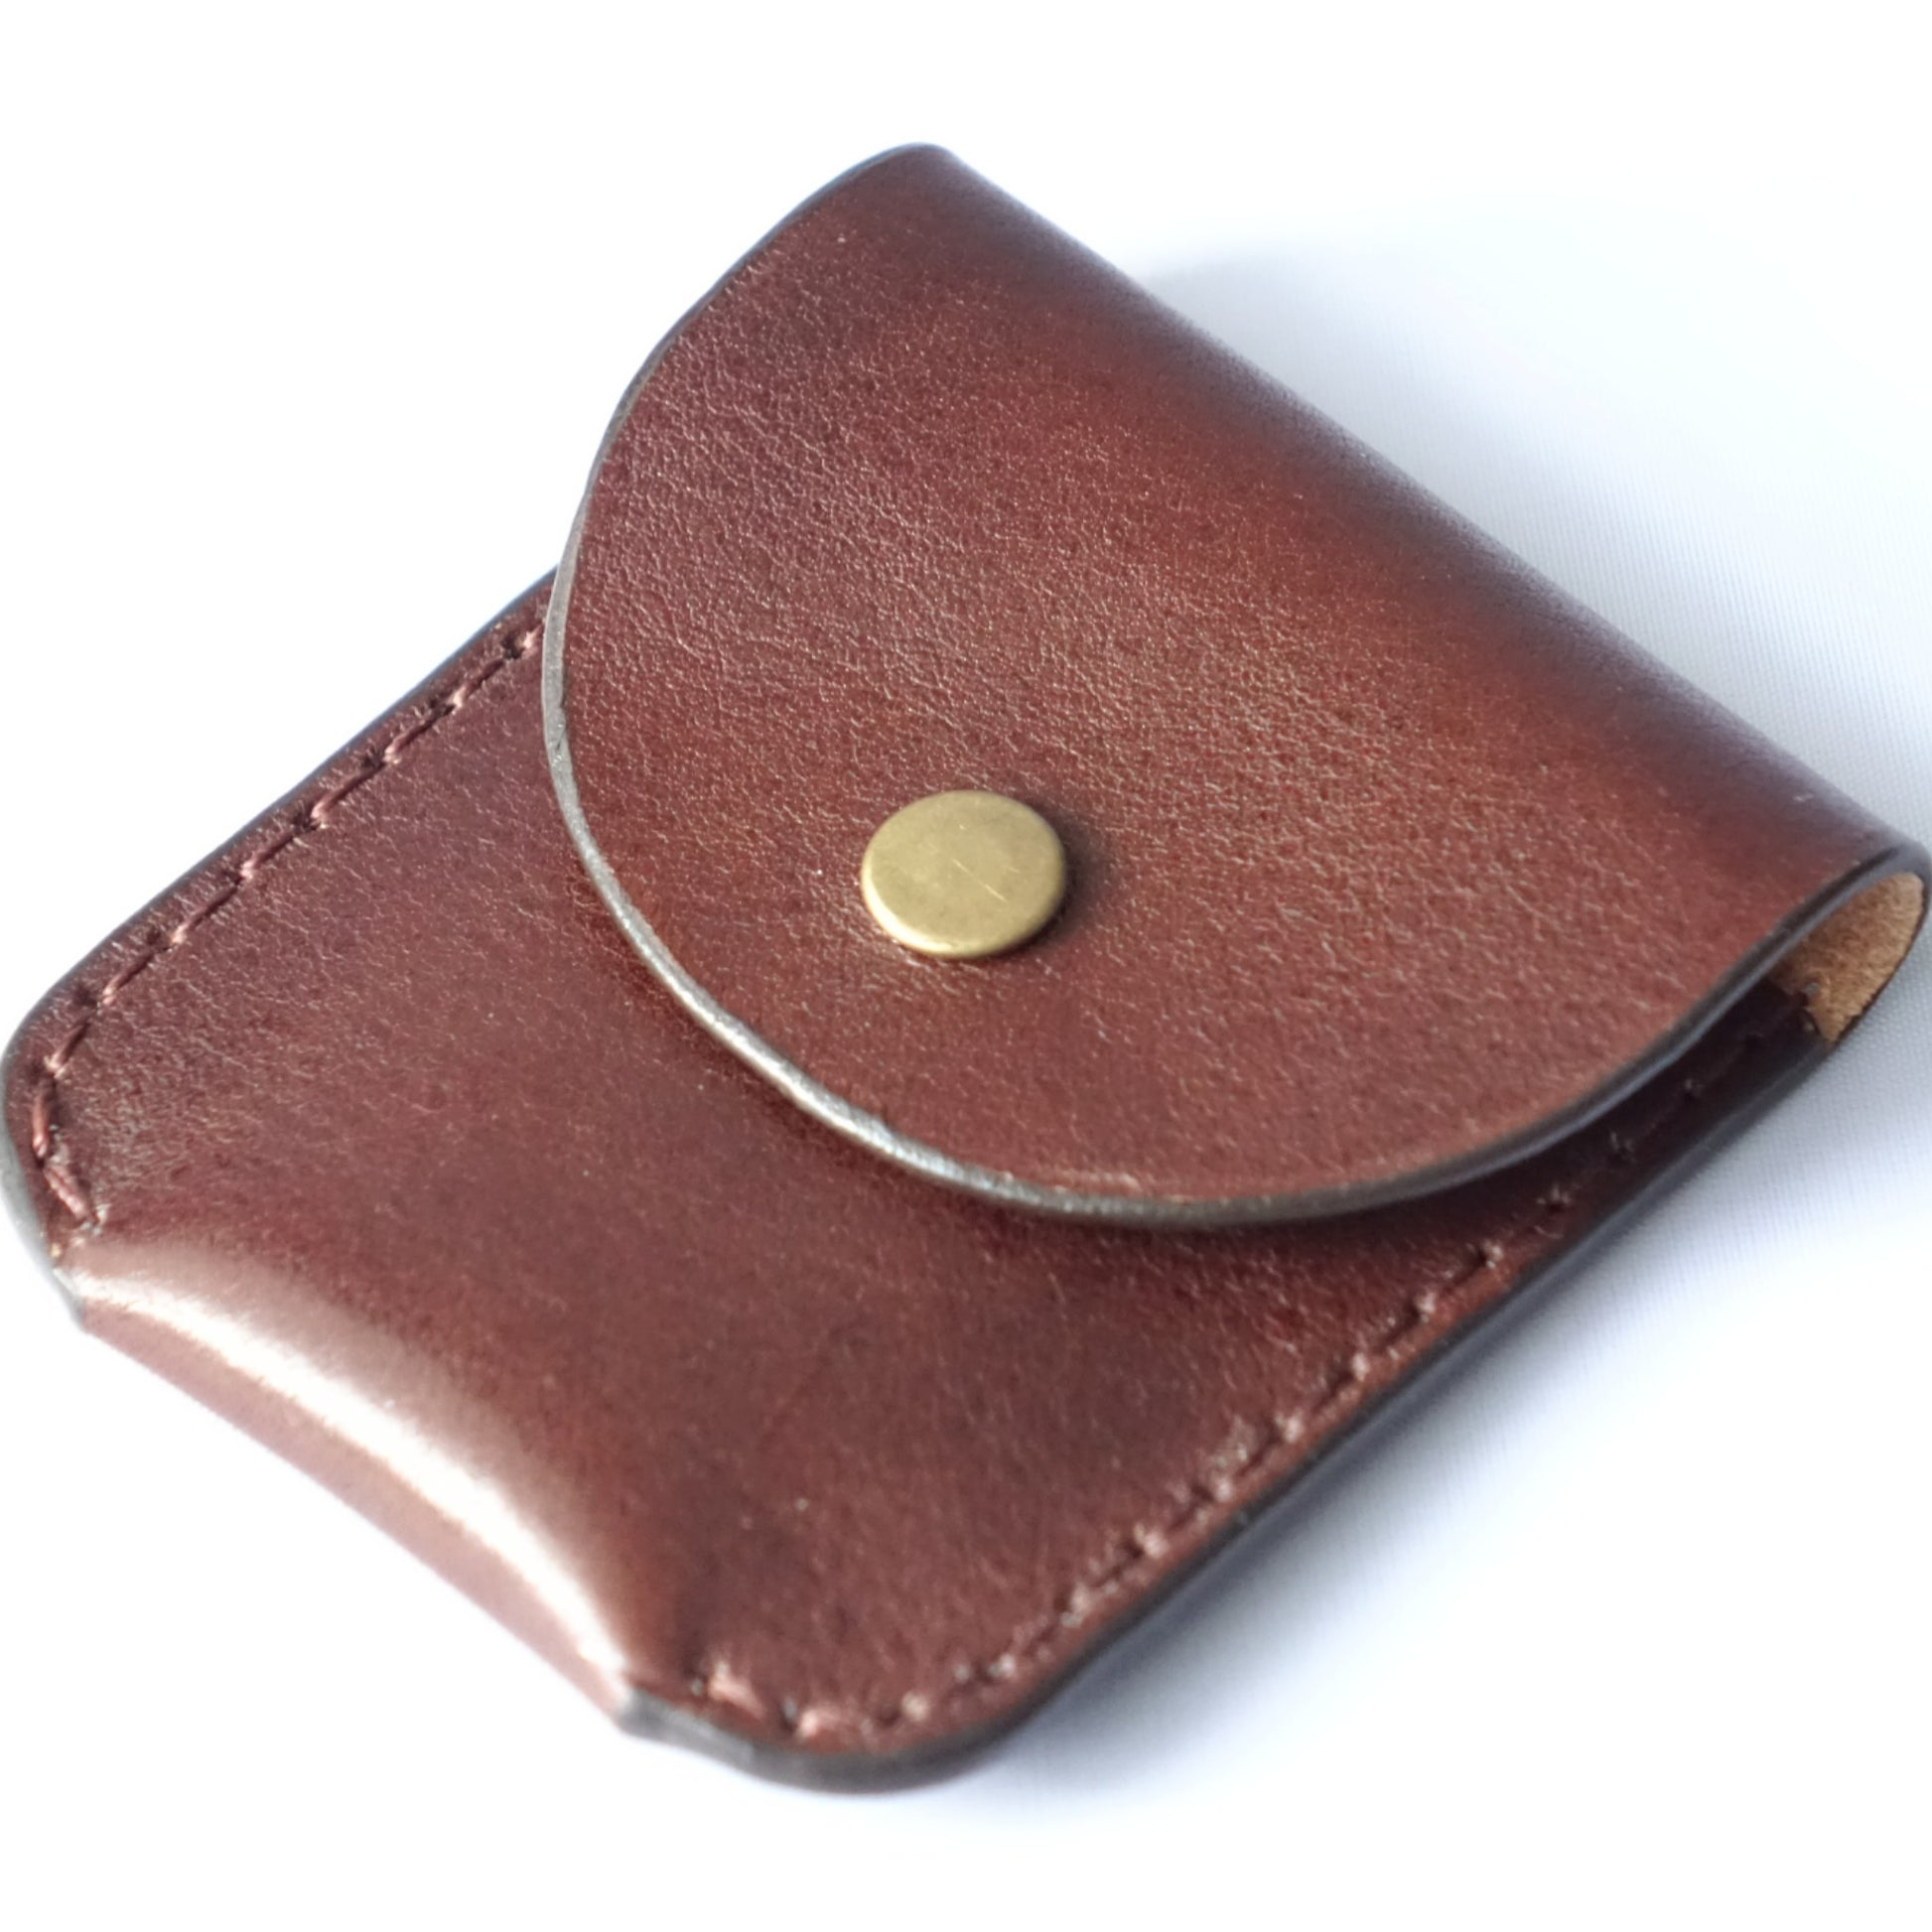 rgc handmade small leather coin purse wallet 9